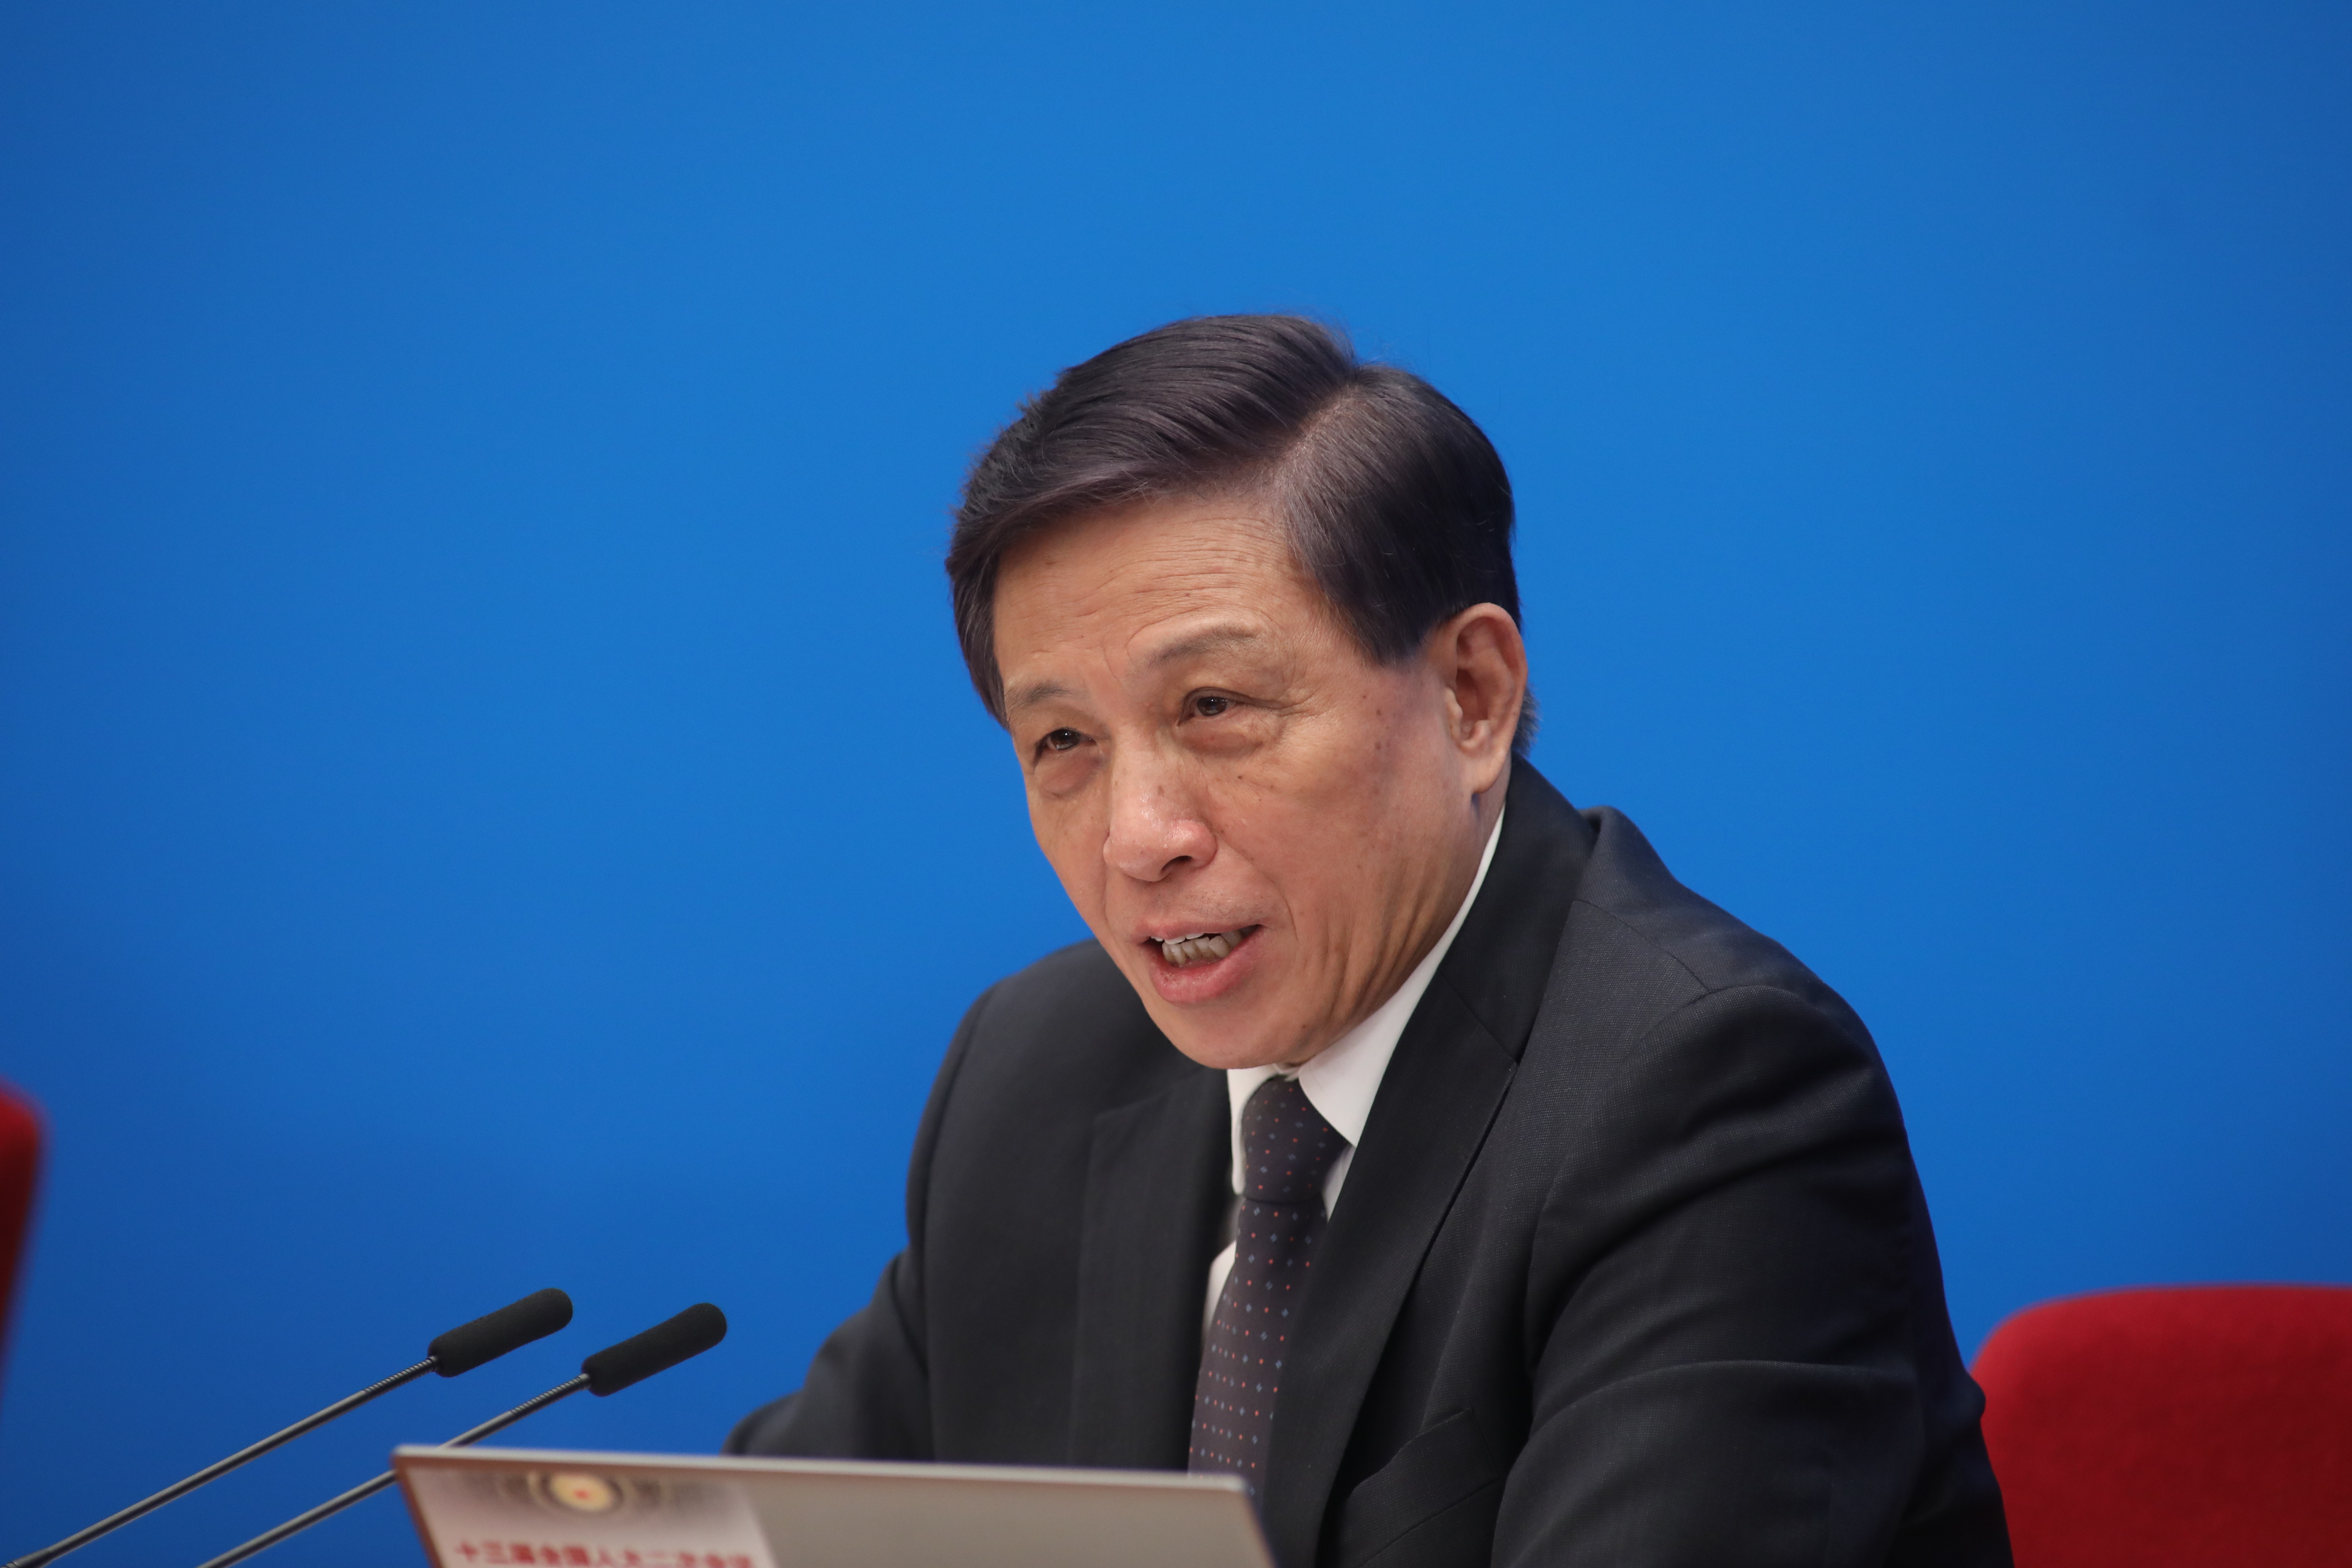 Senior Chinese diplomat Zhang Yesui has called for an end to the US-China trade dispute ahead of the 2nd Plenary Session of the 13th National People's Congress. Photo: Simon Song